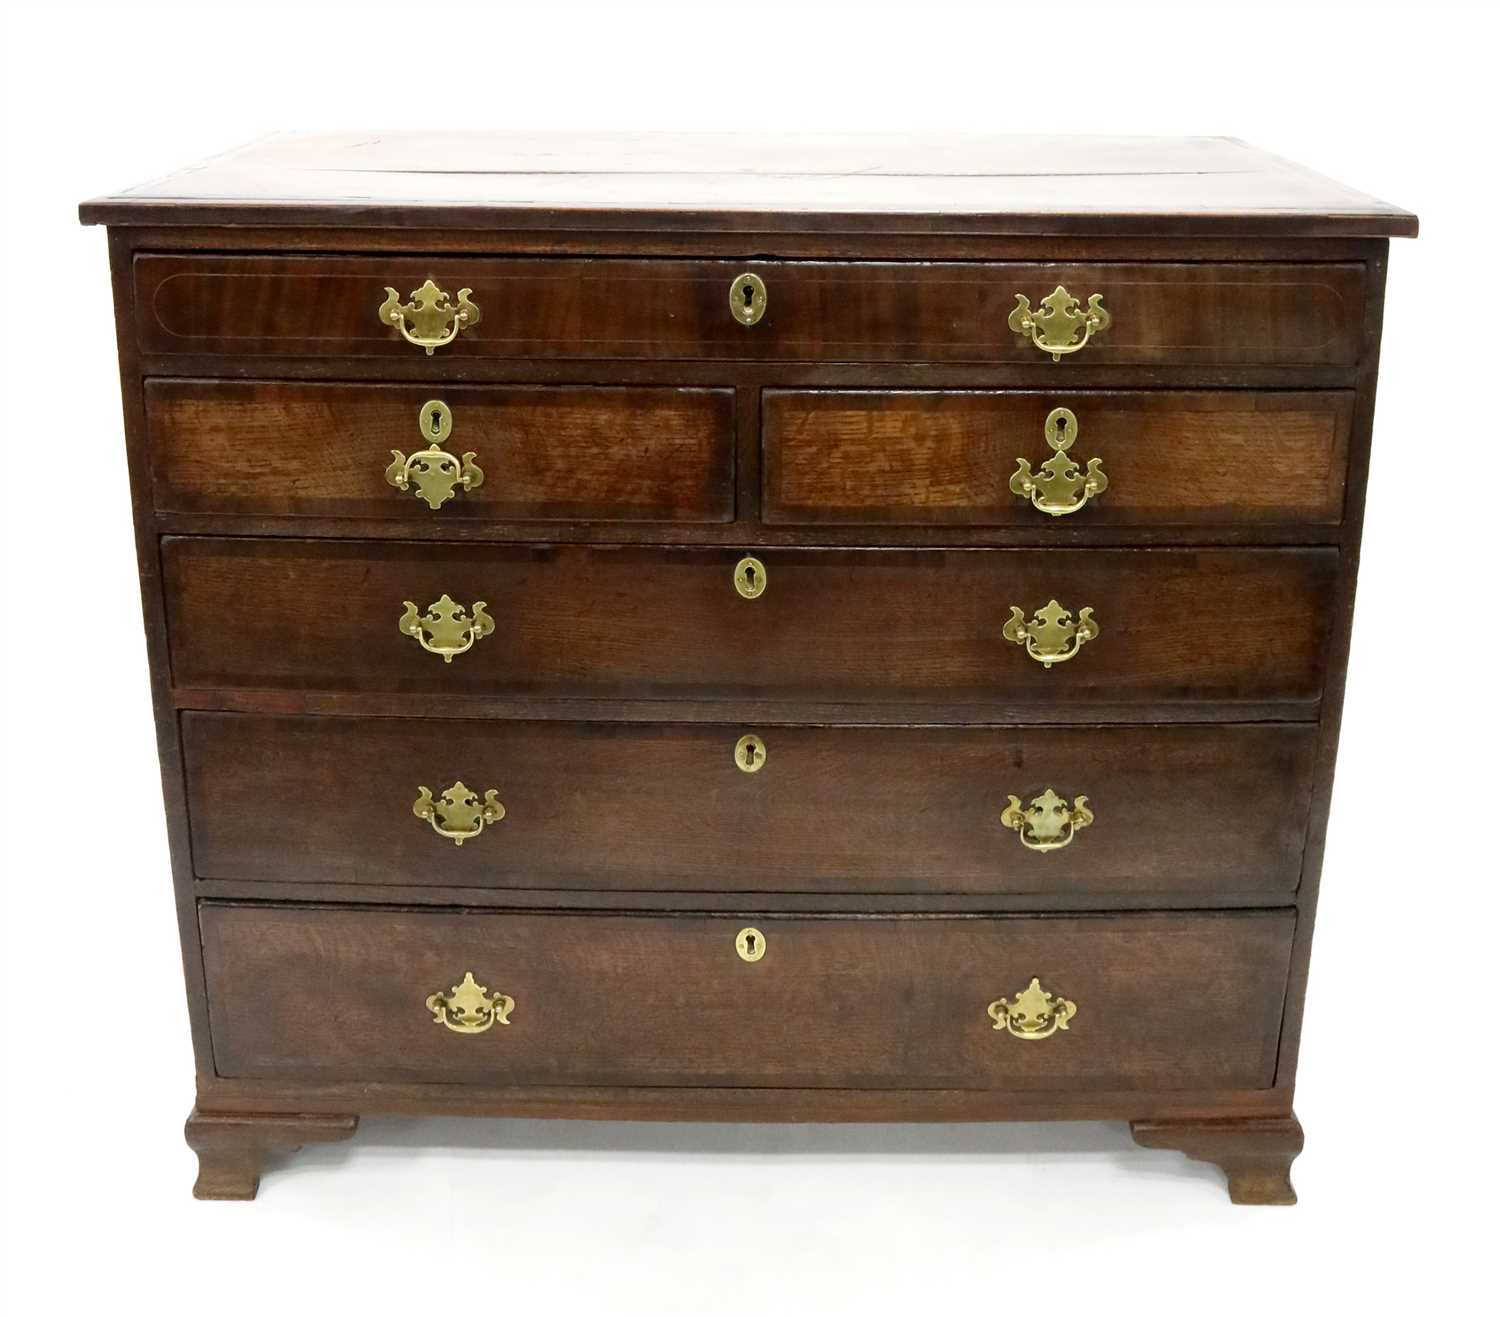 Lot 221 - An early 19th century country oak chest of drawers